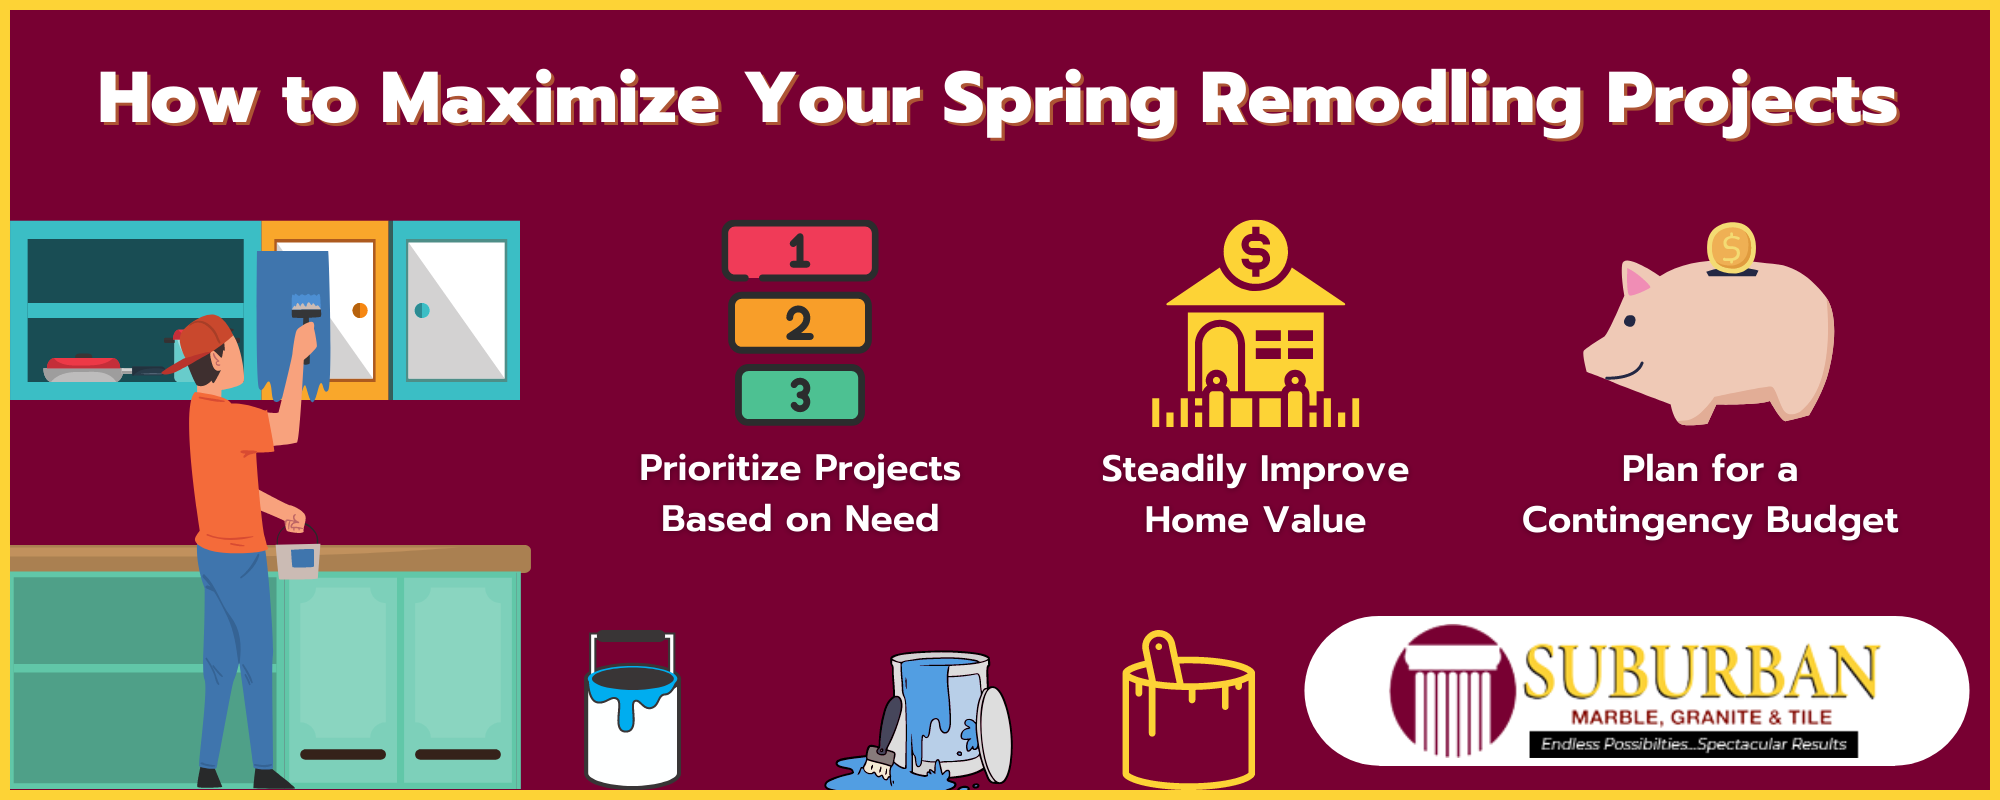 Infographic explaining how to improve spring remodeling projects/